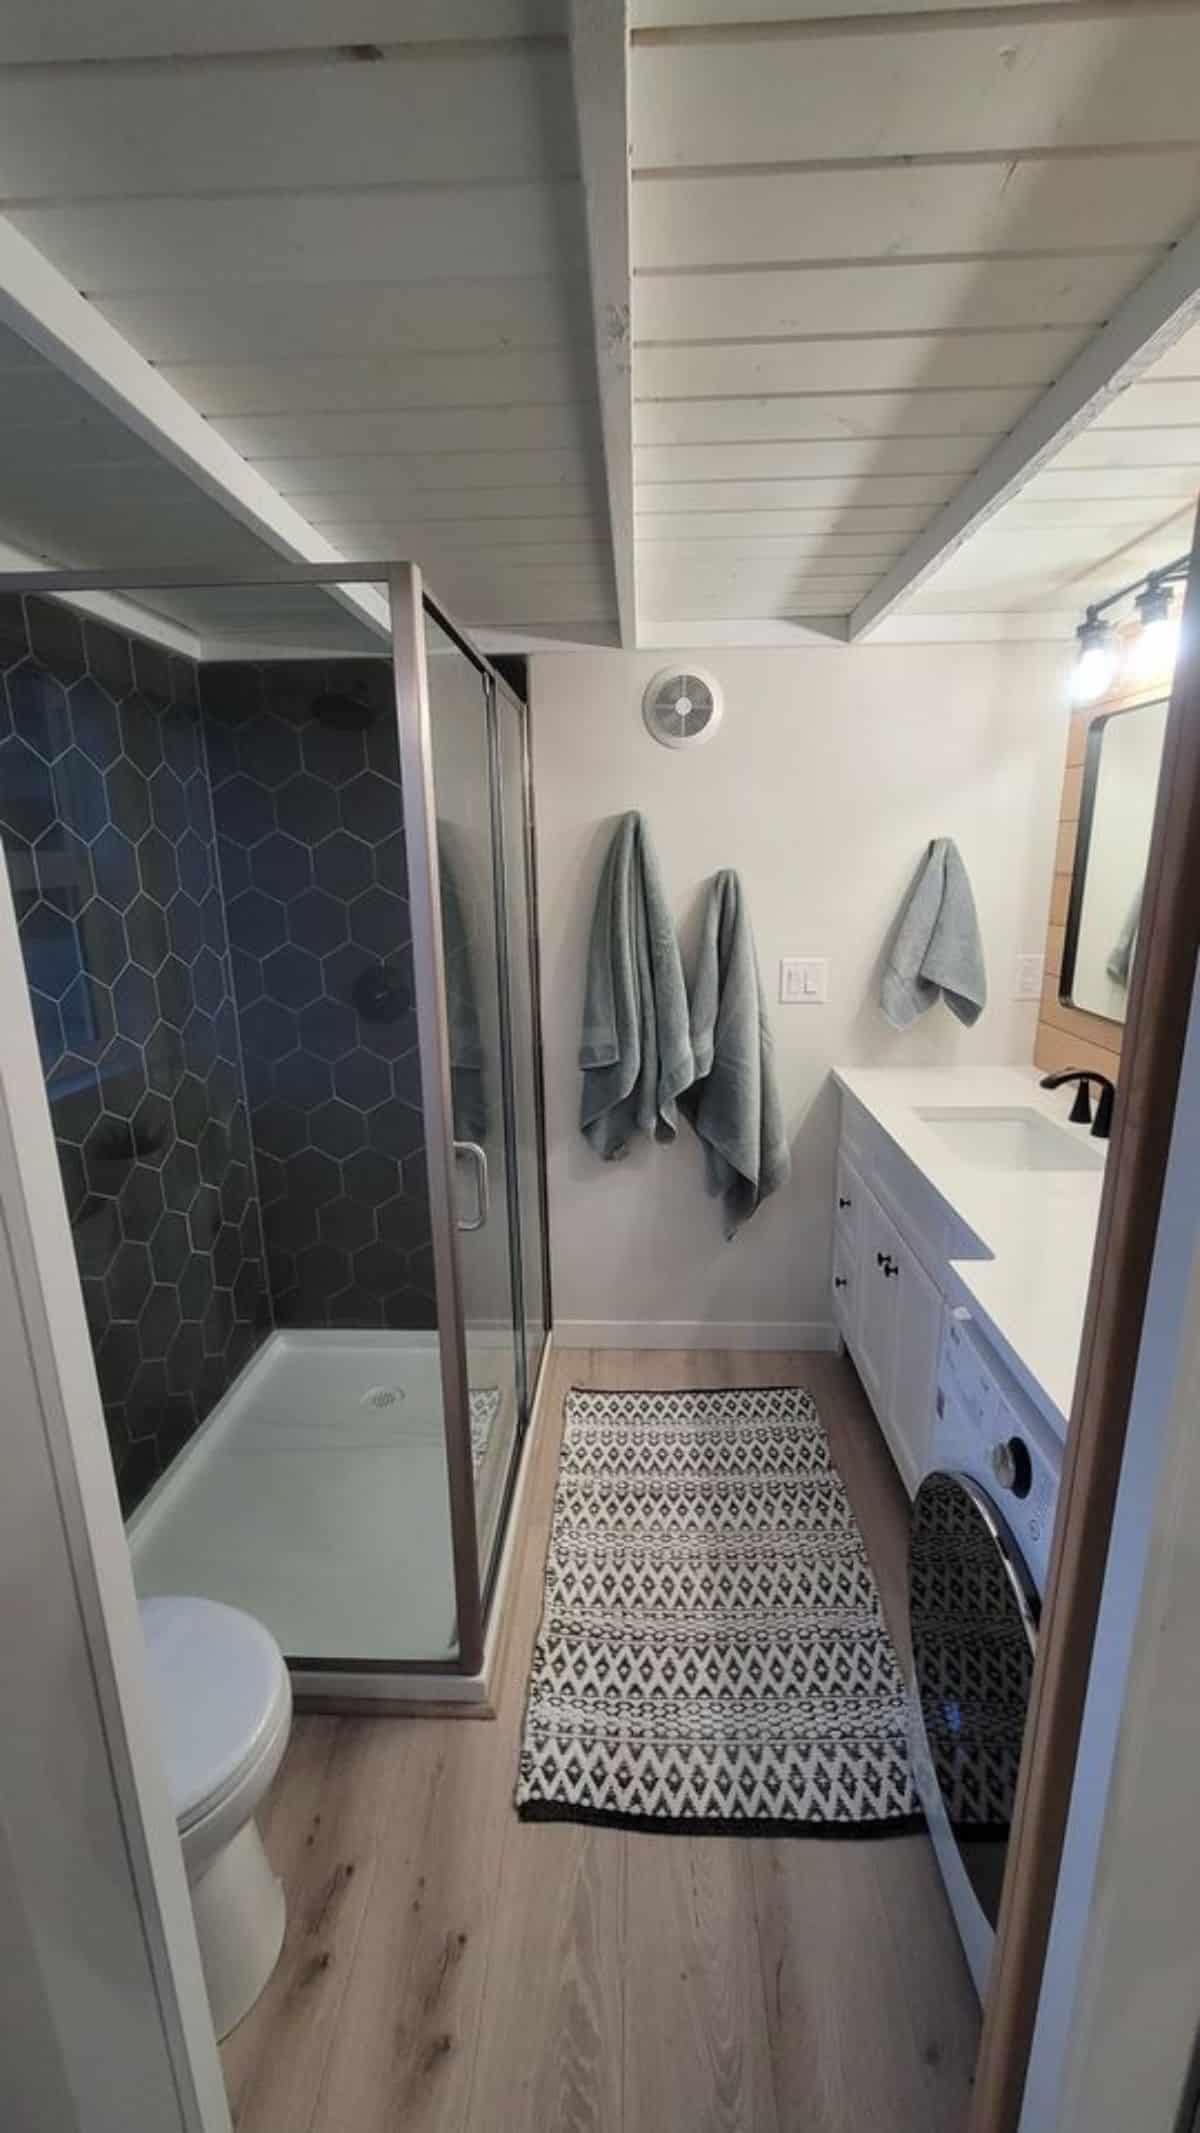 bathroom of custom built tiny home is spacious and its all white styles with standard fittings